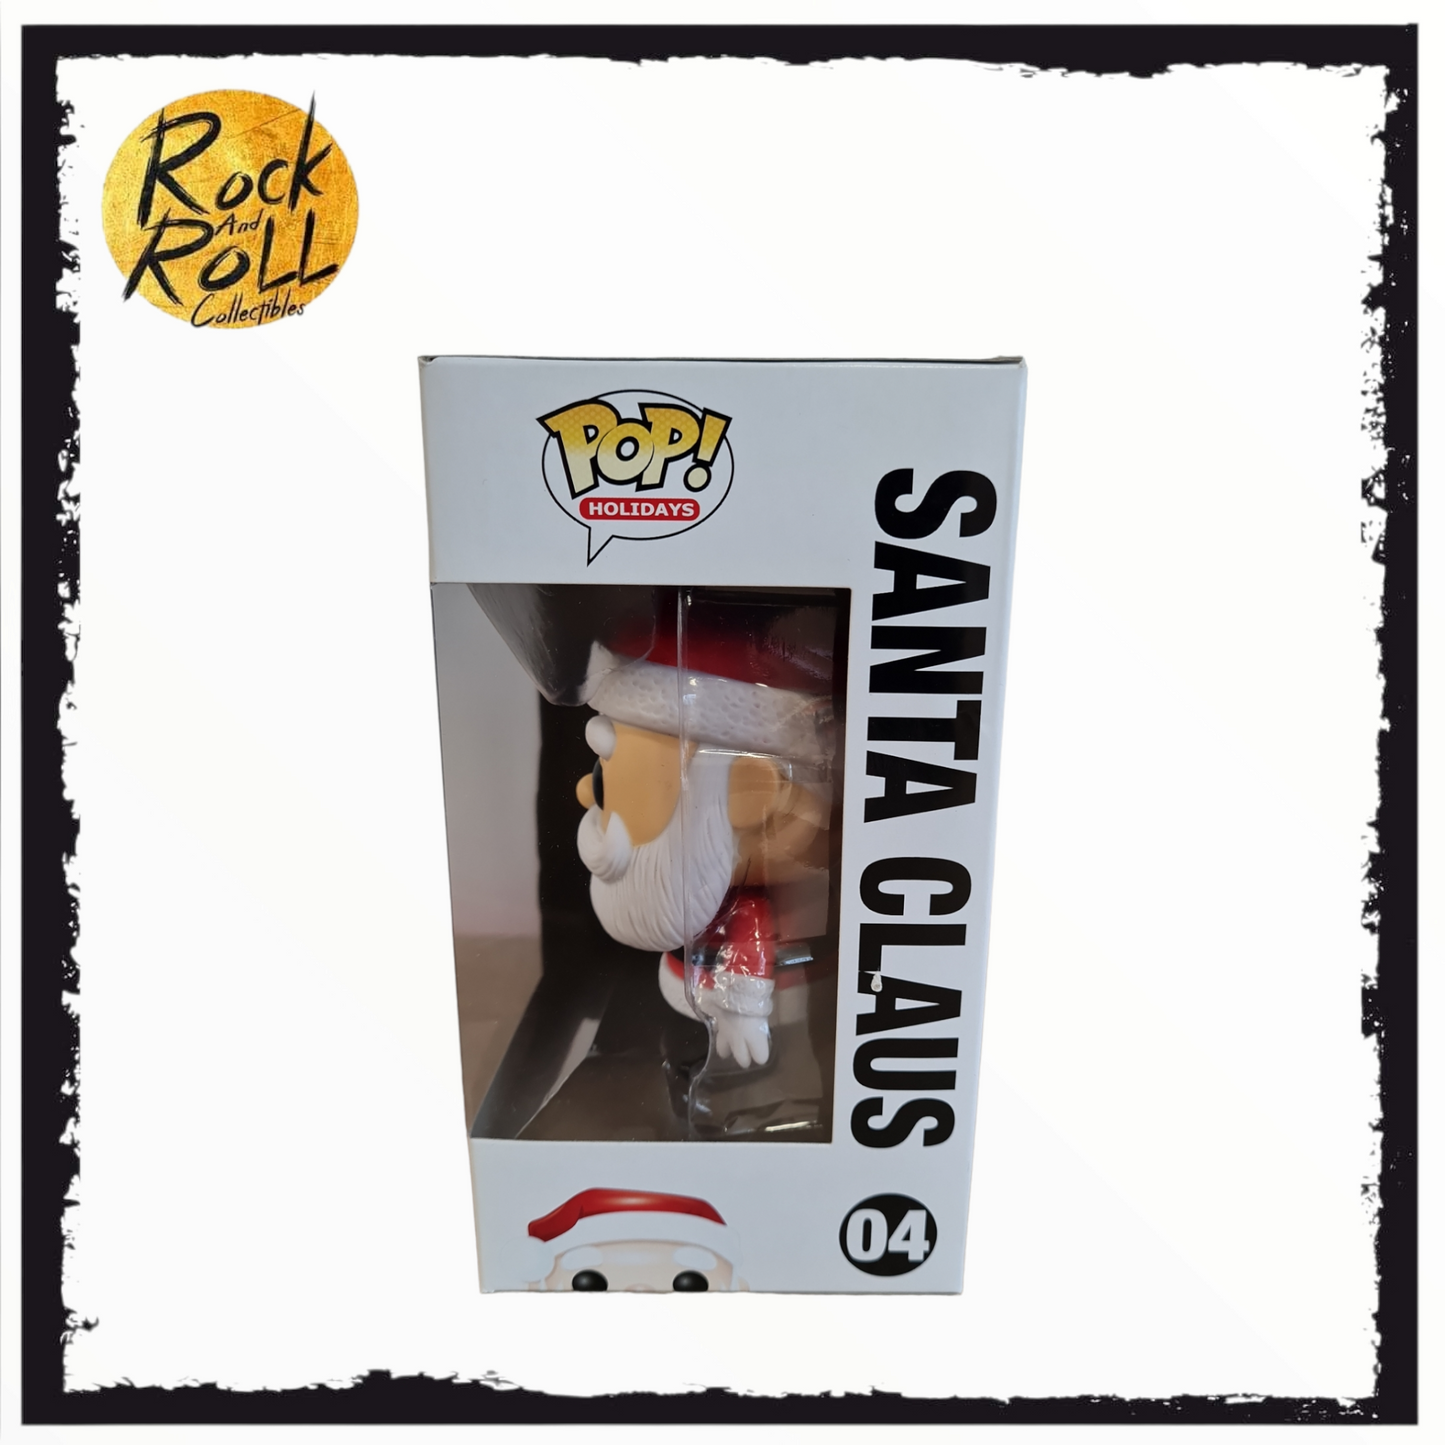 Rudolph The Red-Nosed Reindeer - Santa Claus Funko Pop! #04 Condition 7/10